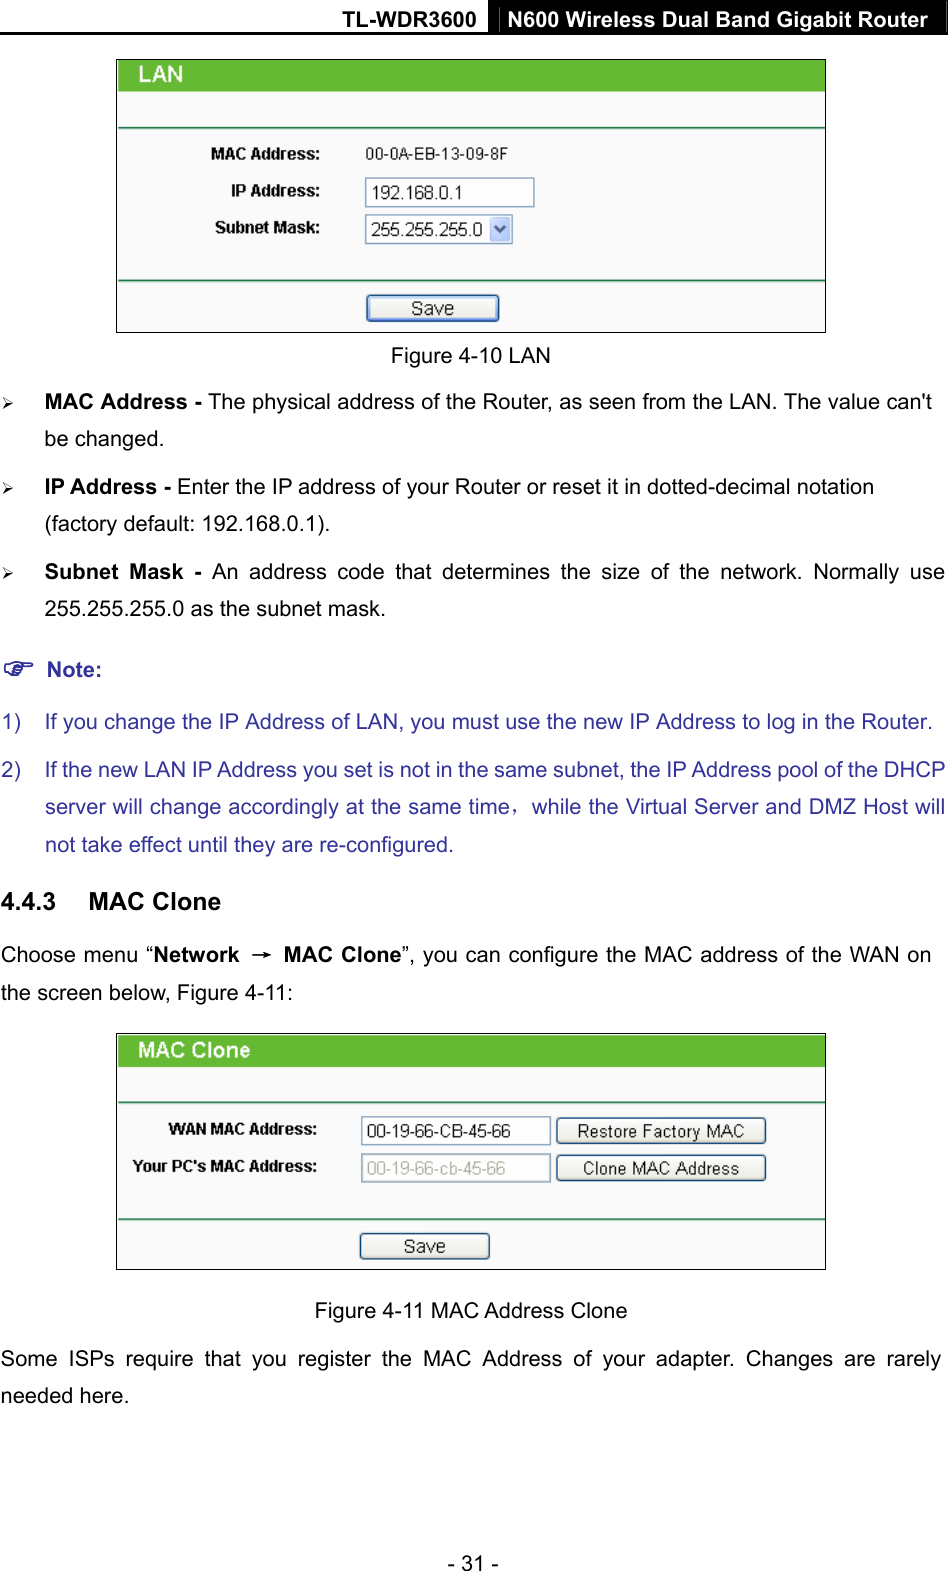 TL-WDR3600 N600 Wireless Dual Band Gigabit Router  - 31 -  Figure 4-10 LAN ¾ MAC Address - The physical address of the Router, as seen from the LAN. The value can&apos;t be changed. ¾ IP Address - Enter the IP address of your Router or reset it in dotted-decimal notation (factory default: 192.168.0.1). ¾ Subnet Mask - An address code that determines the size of the network. Normally use 255.255.255.0 as the subnet mask.   ) Note: 1)  If you change the IP Address of LAN, you must use the new IP Address to log in the Router.   2)  If the new LAN IP Address you set is not in the same subnet, the IP Address pool of the DHCP server will change accordingly at the same time，while the Virtual Server and DMZ Host will not take effect until they are re-configured. 4.4.3  MAC Clone Choose menu “Network  → MAC Clone”, you can configure the MAC address of the WAN on the screen below, Figure 4-11:  Figure 4-11 MAC Address Clone Some ISPs require that you register the MAC Address of your adapter. Changes are rarely needed here. 